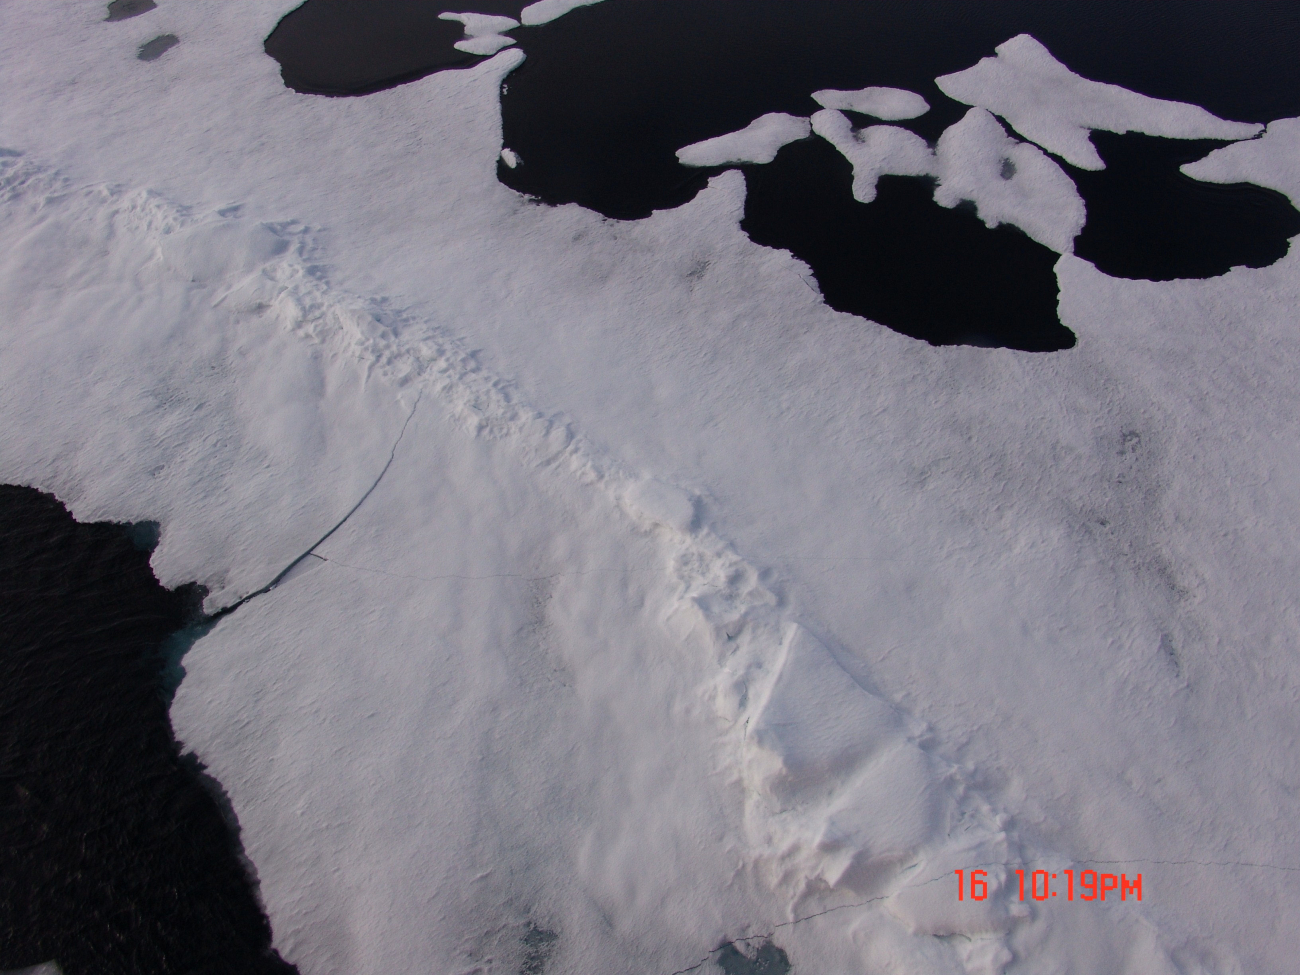 Helicopter eye view of remains of an ice ridge as seen in late summer